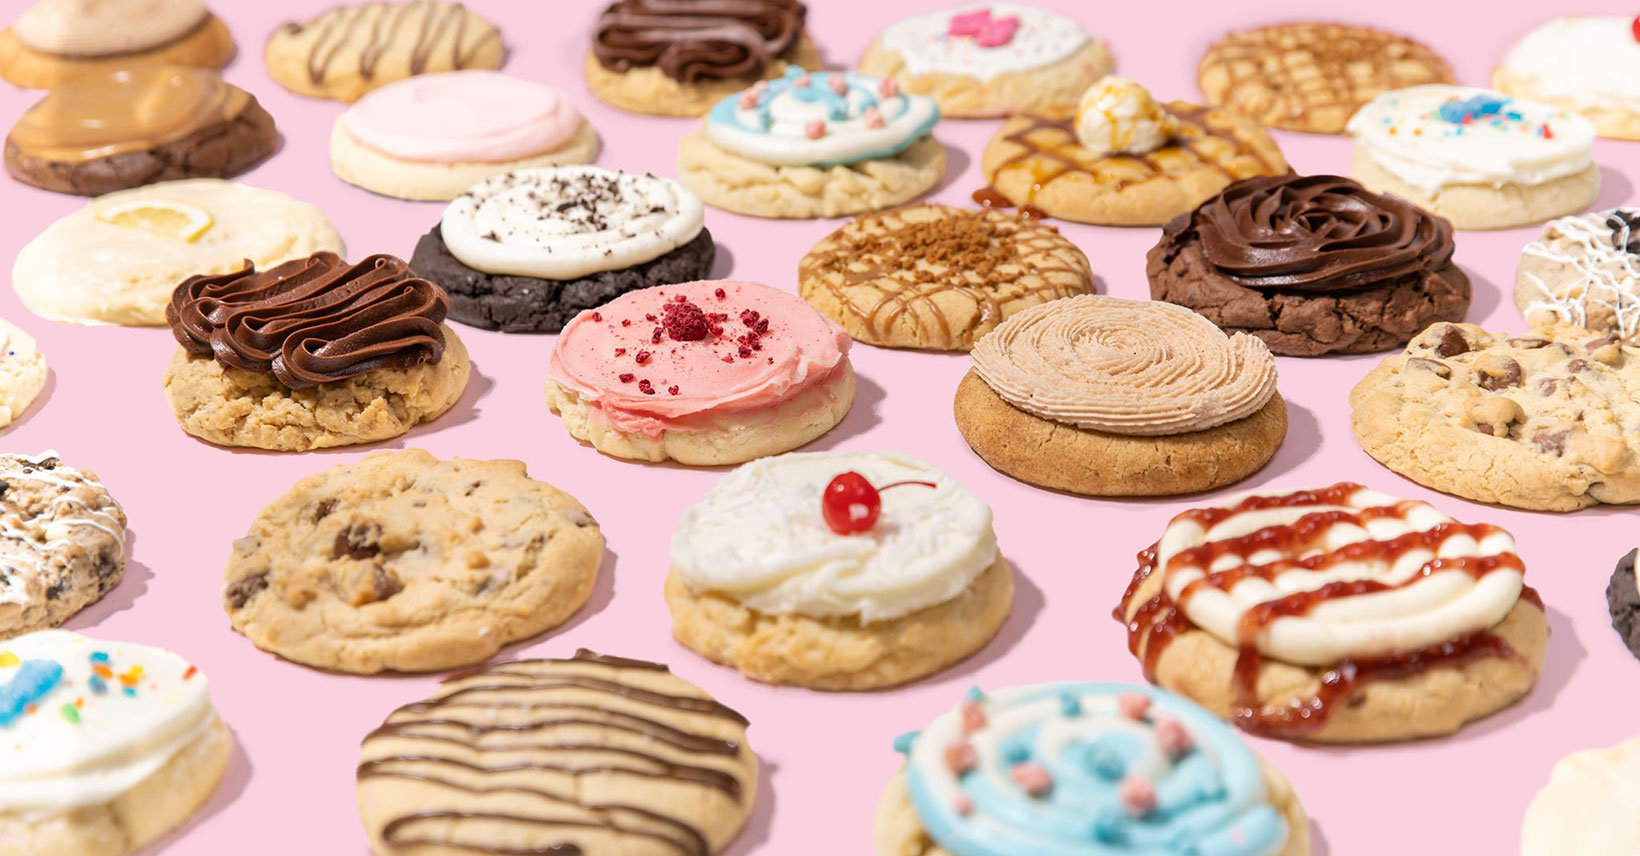 50% Off Crumbl Cookies Coupon (2 Promo Codes) March 2021 - wide 7